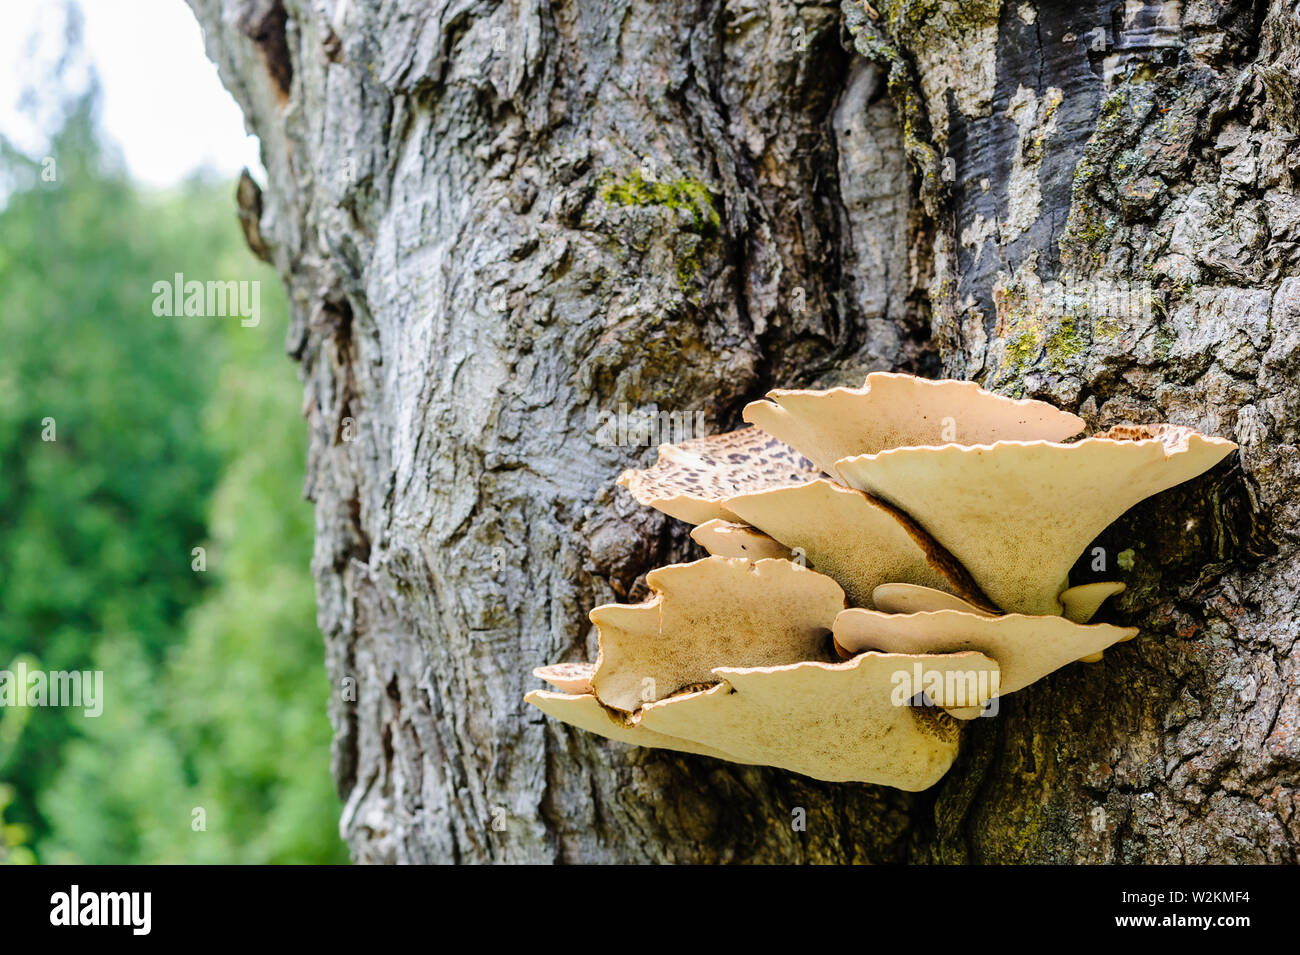 Underside of parasitic brown fungus growing out of tree bark. Stock Photo